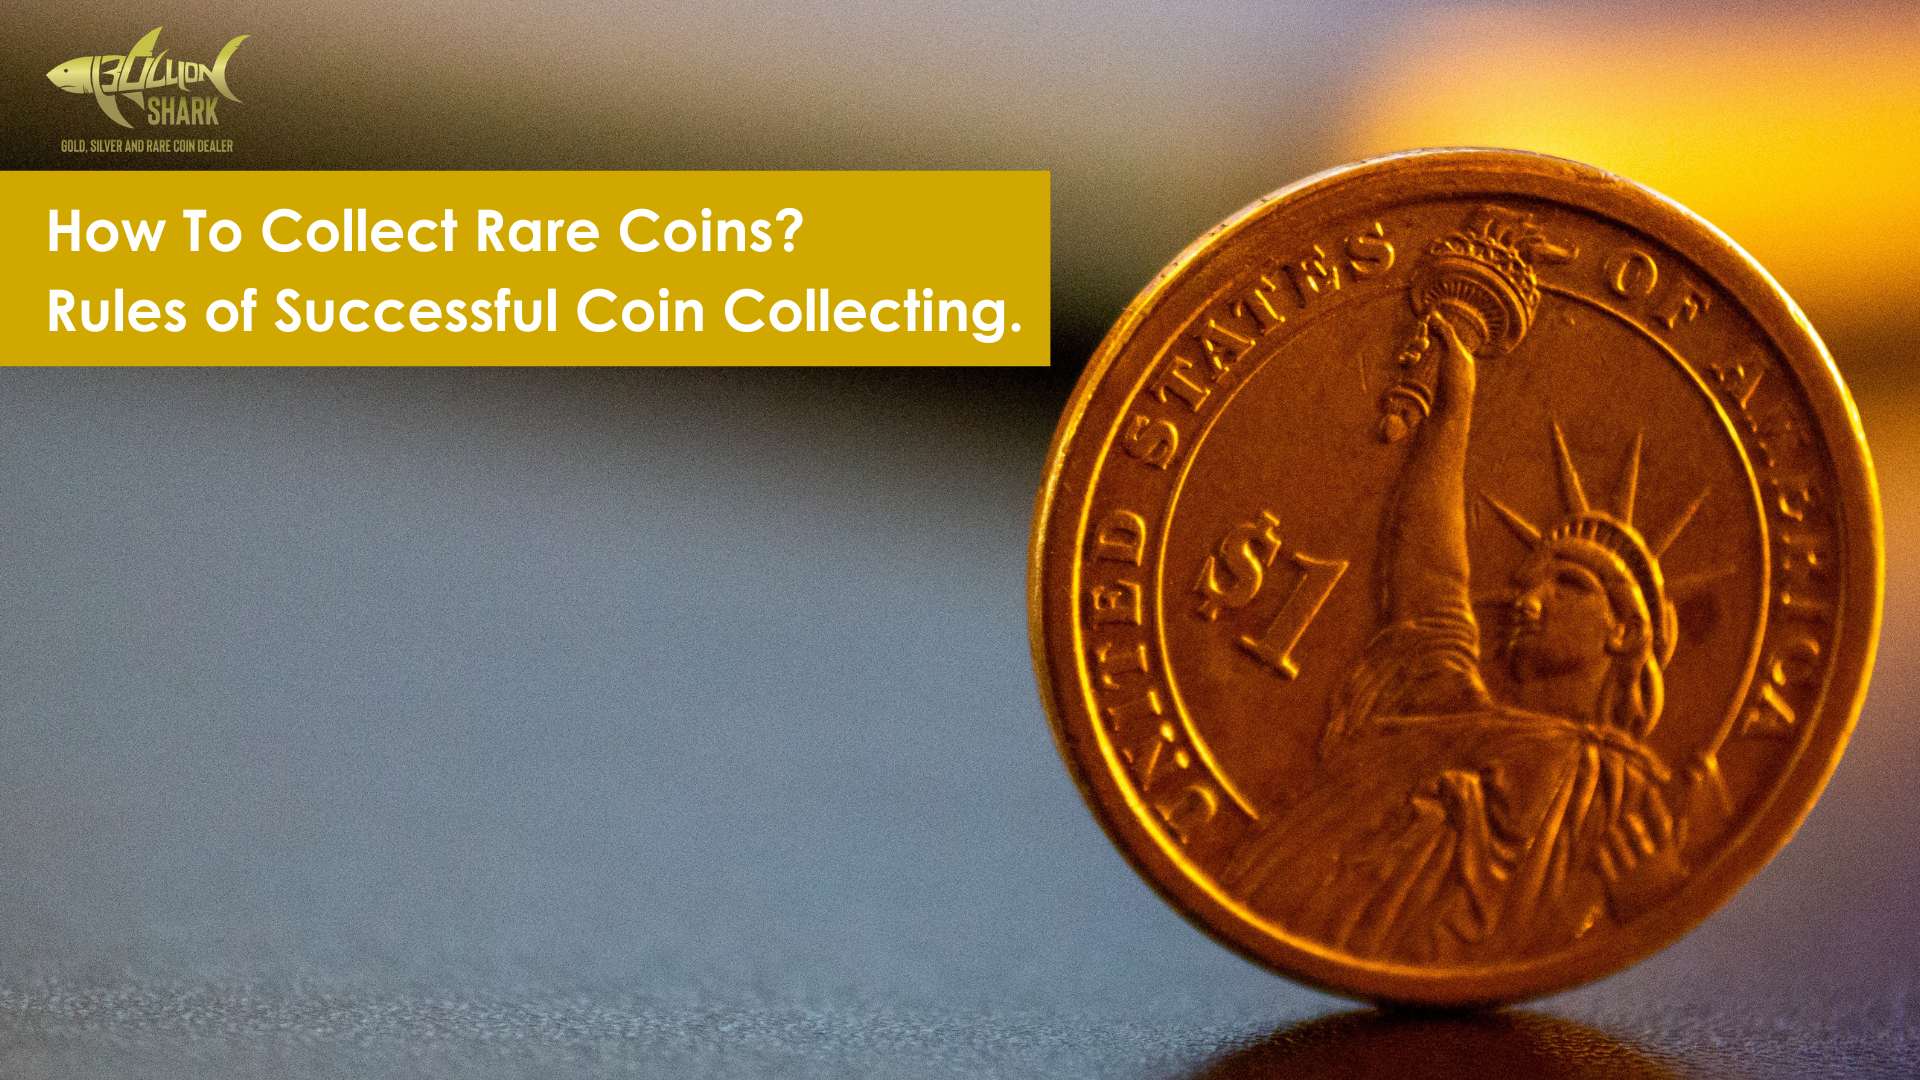 "How To Collect Rare Coins? Rules of Successful Coin Collecting."